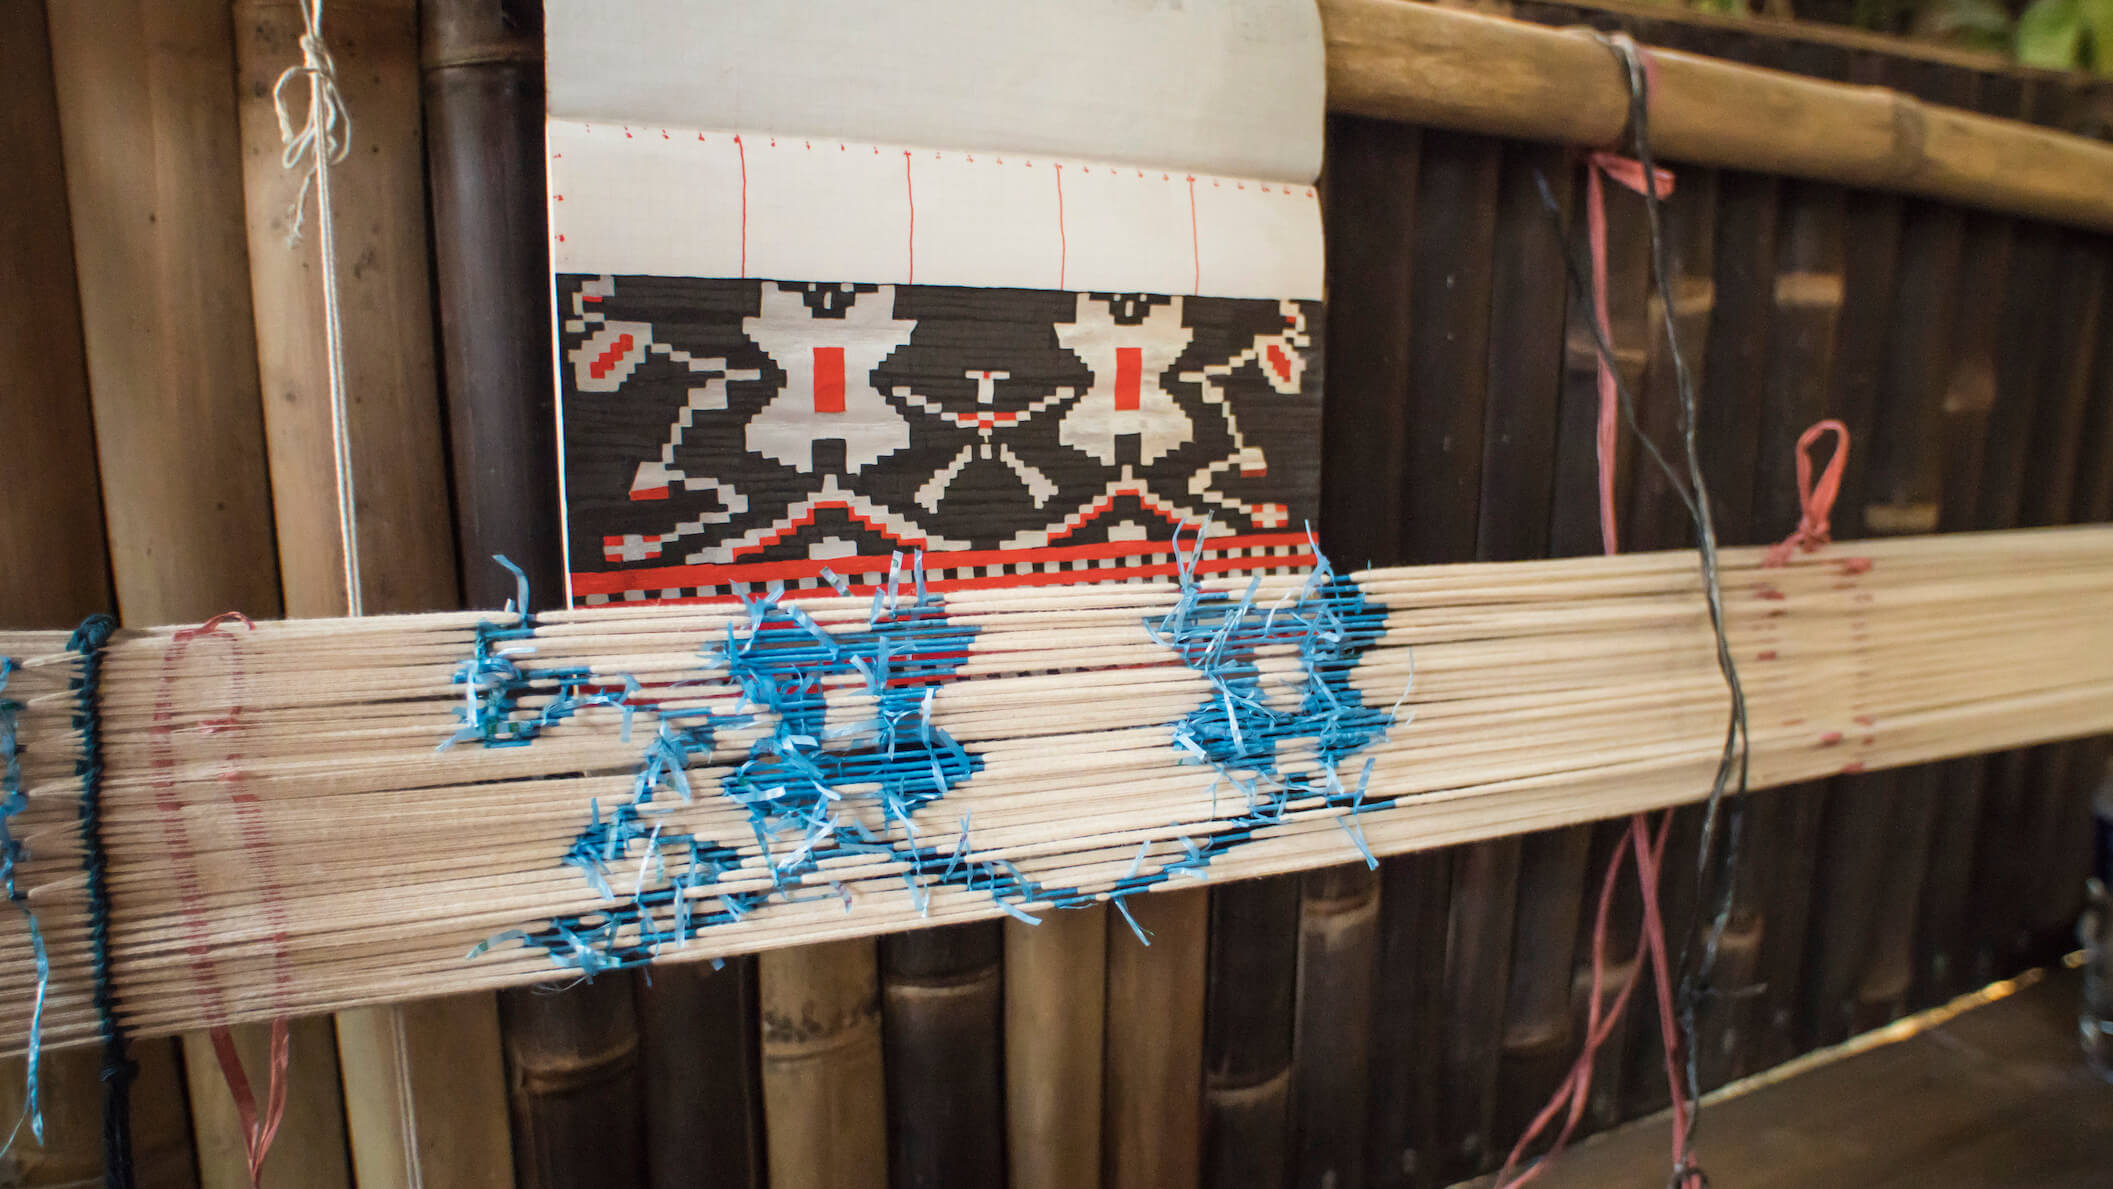 Ikat means “to bind” in Malay and Indonesian. A chosen motif is painstakingly applied through a process known as resist binding, where threads are bound tightly in a wrapping. Photo by Andra Fembriarto